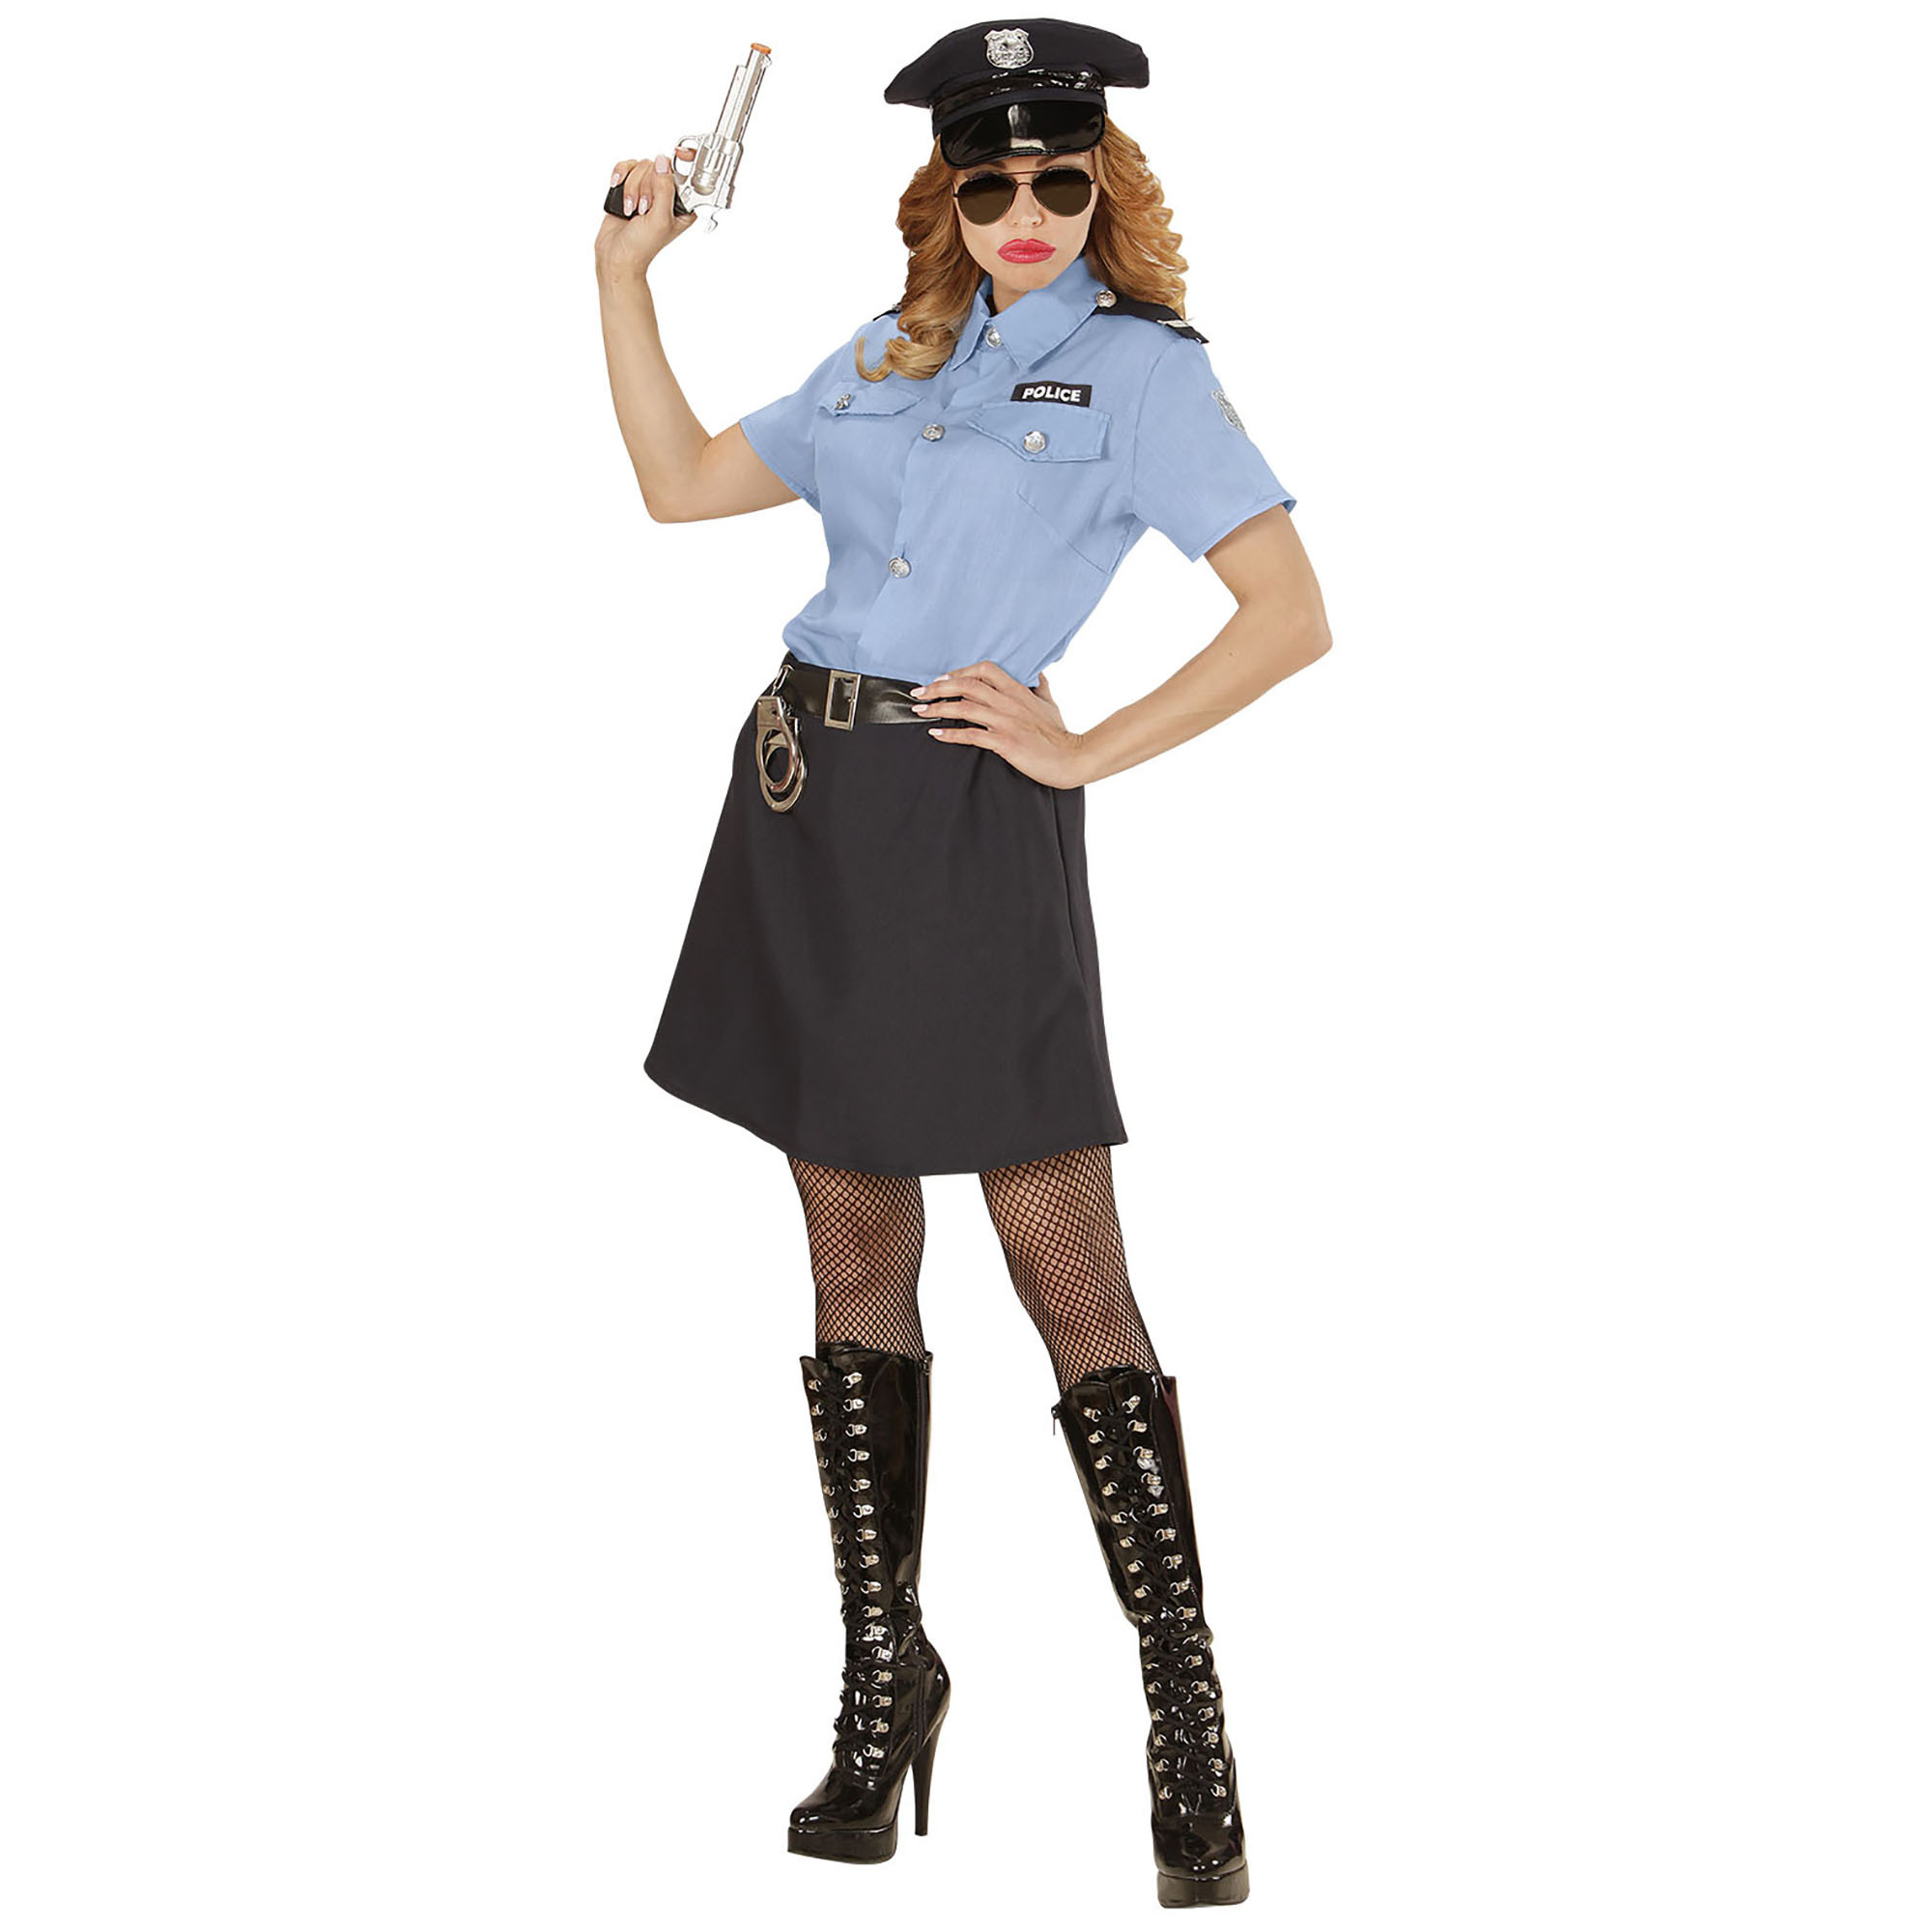 Uitdagend politie dames outfit 